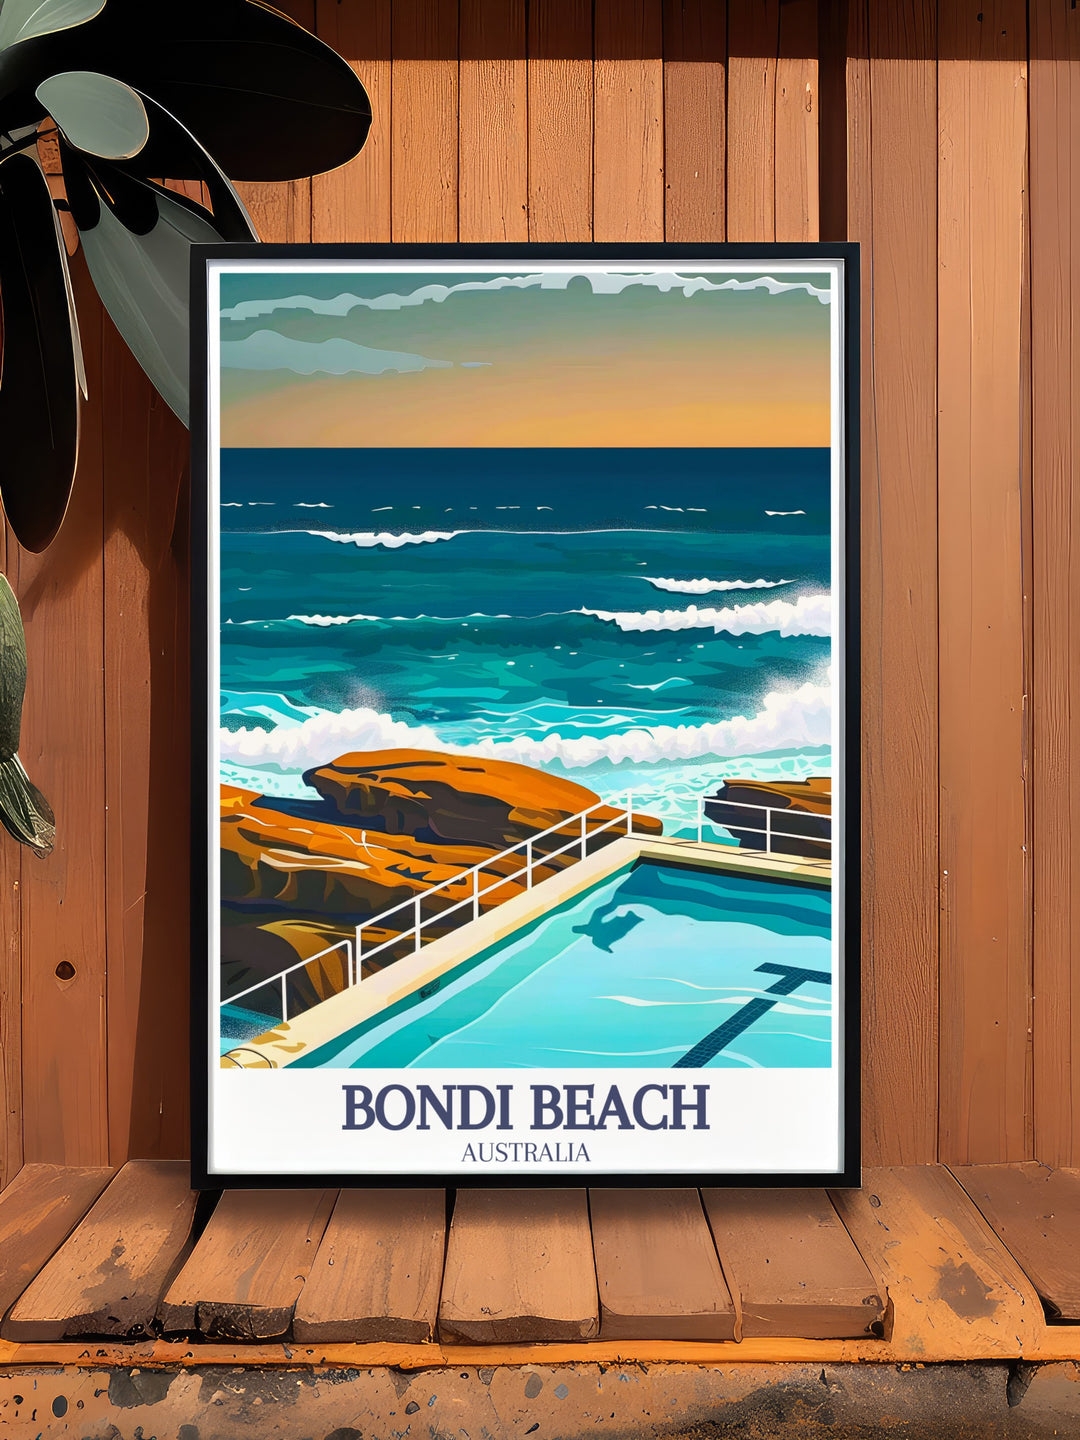 Sydney poster featuring the iconic Harbour Bridge and Sydney Opera House. Bondi Icebergs pool Bondi digital print capturing the lively beach atmosphere. Perfect for adding a touch of nostalgia and contemporary style to your living space.